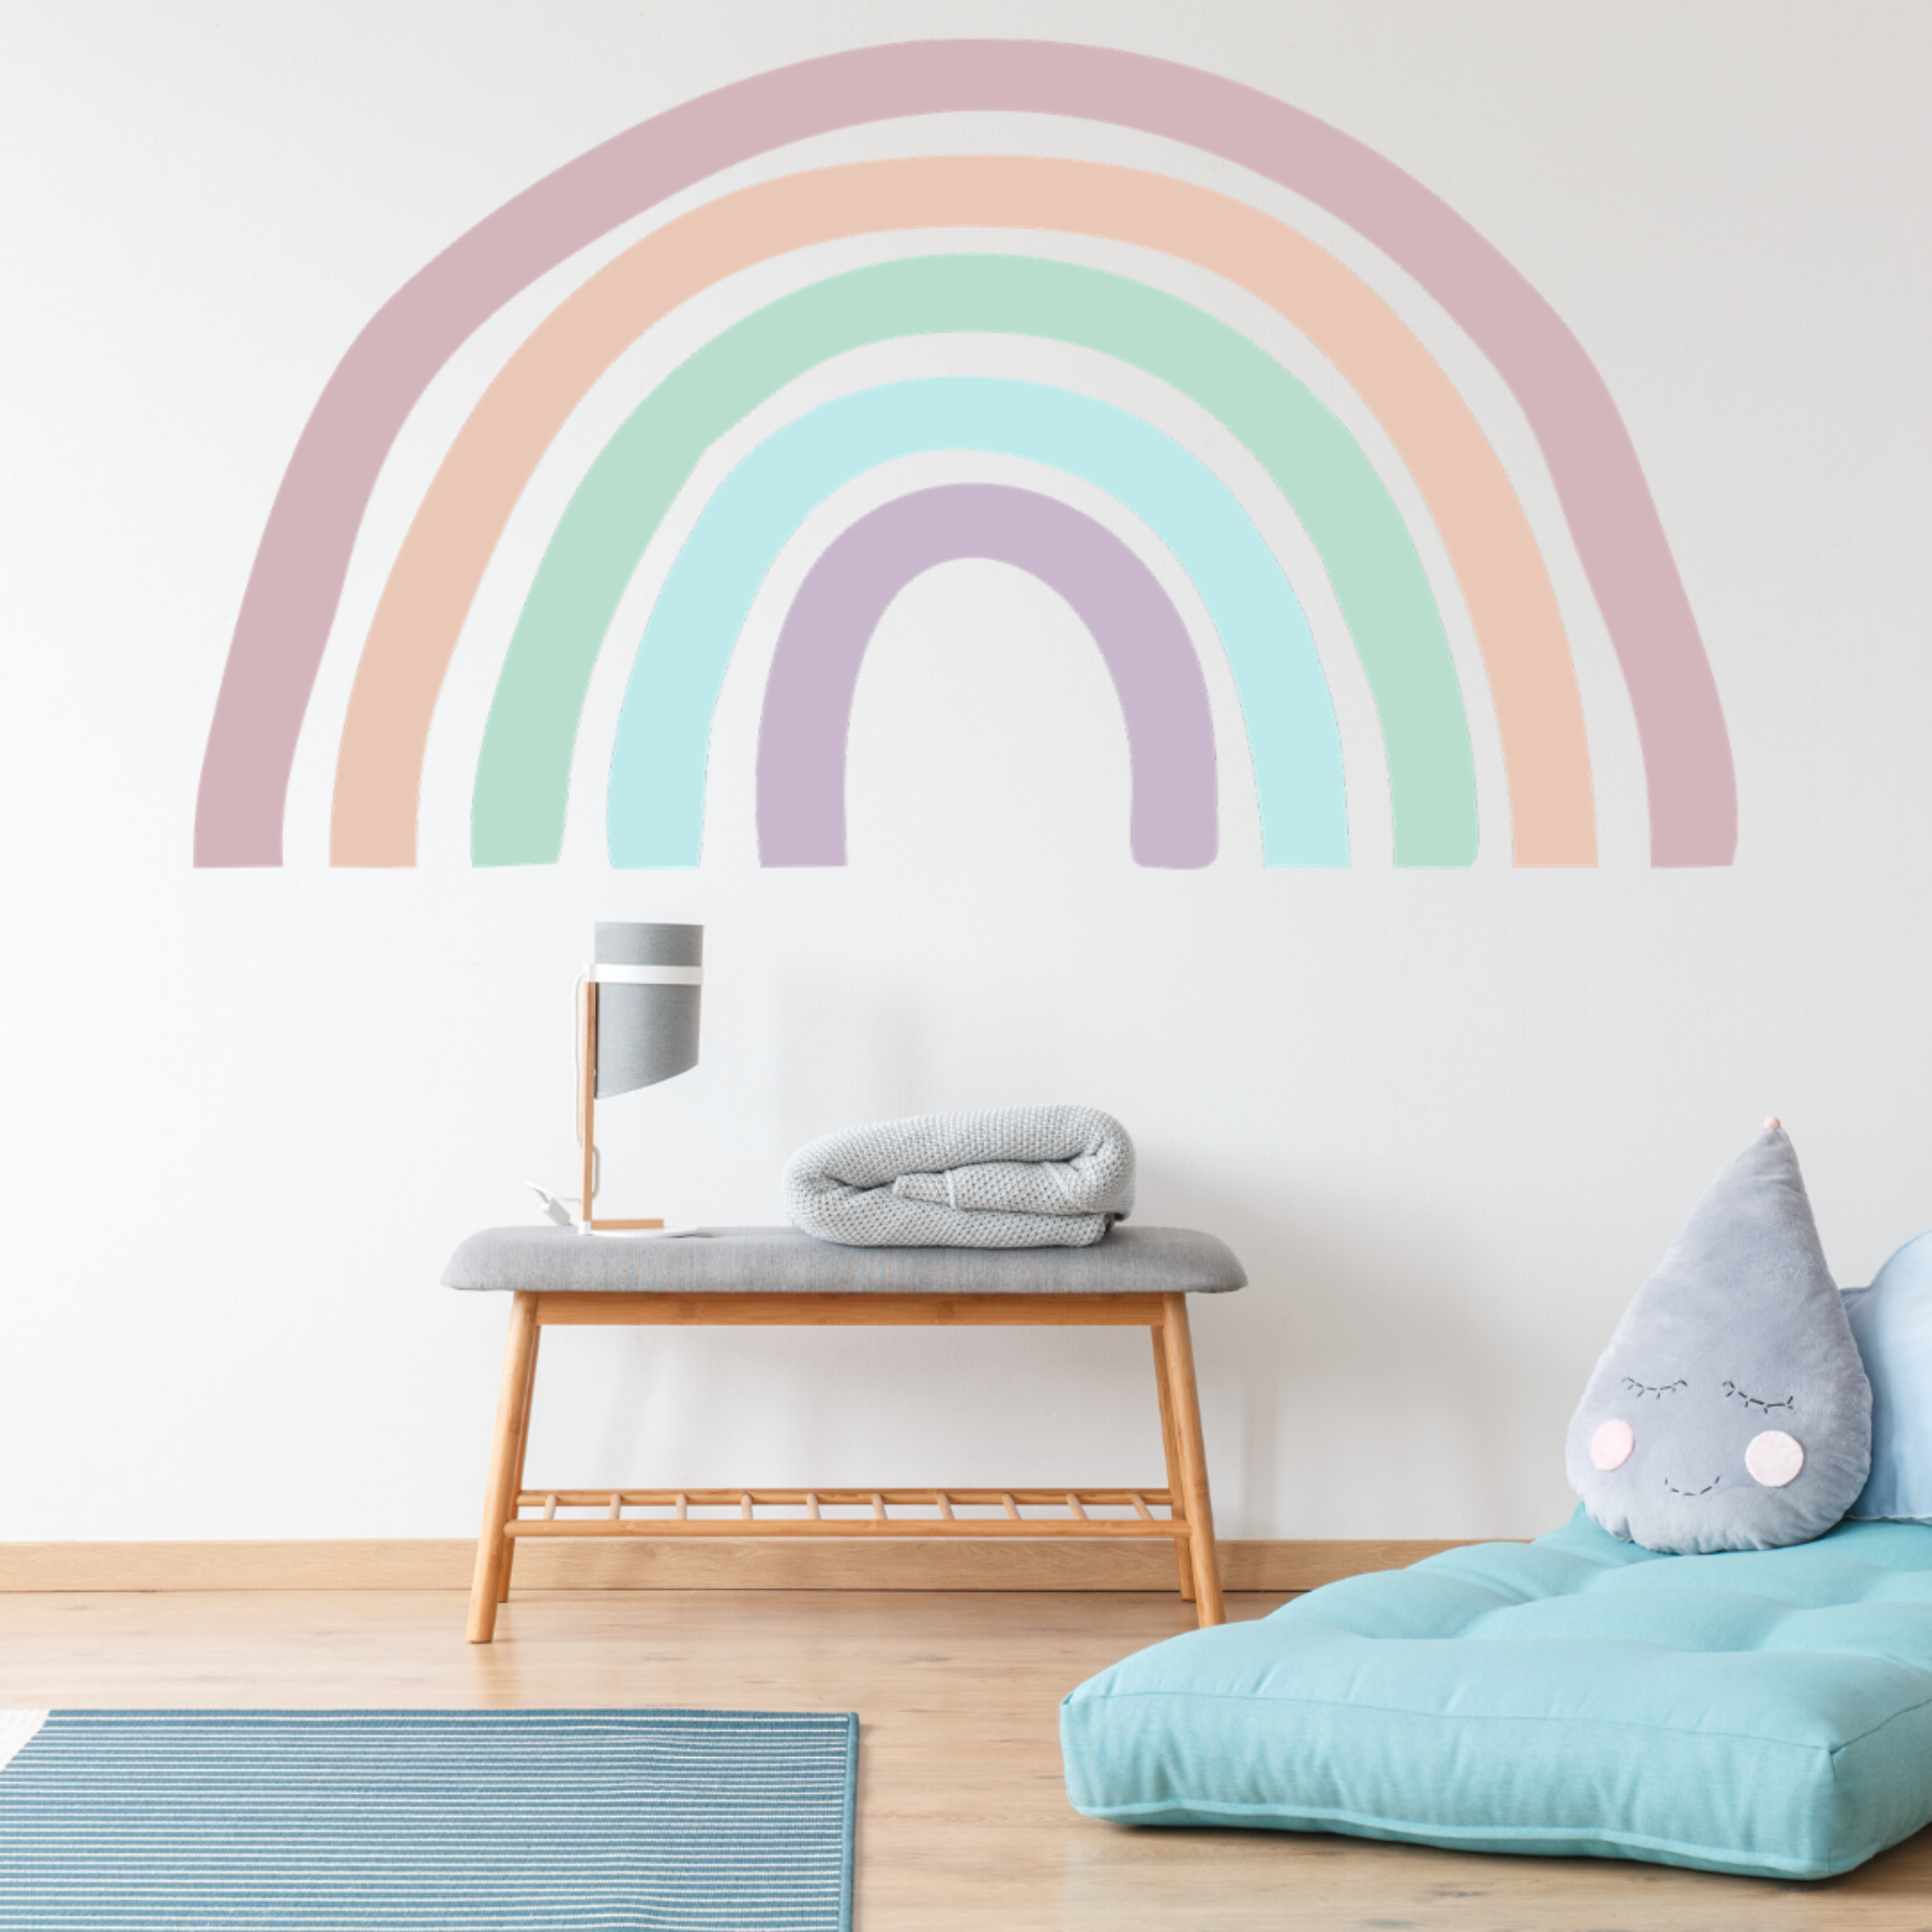 Spring wall decals and decor ideas to decorate the walls of your home, church, school or office with cheery designs by The Simple Stencil